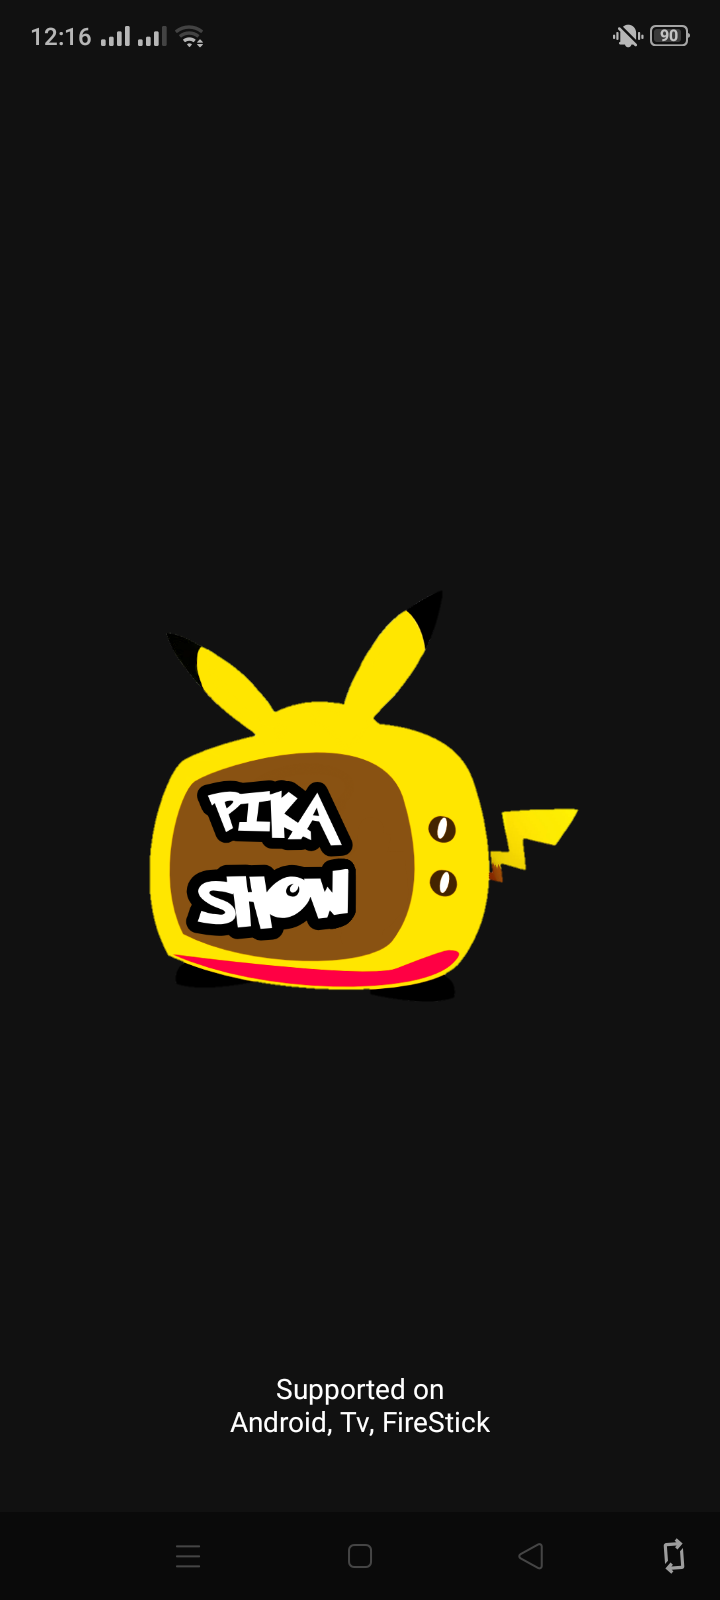 Pikashow Apk Download For Android [Watch Movies & Live TV]